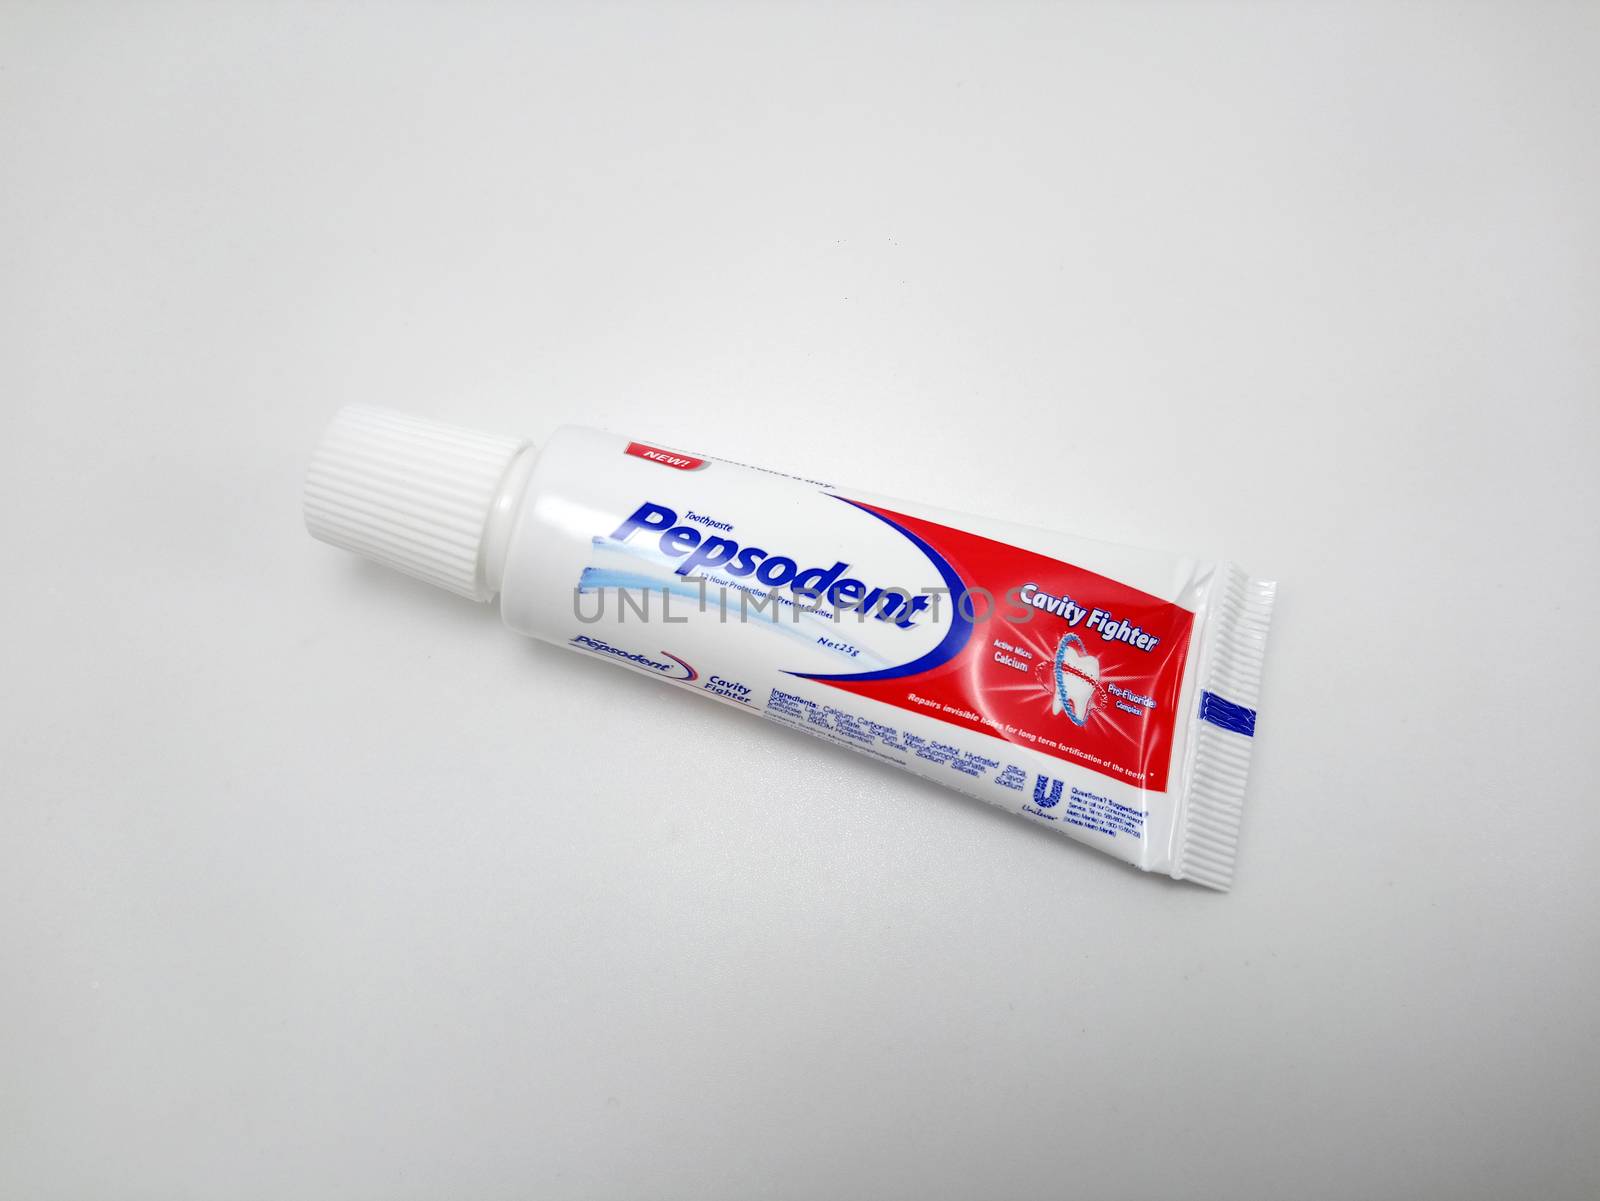 Pepsodent toothpaste tube in Manila, Philippines by imwaltersy